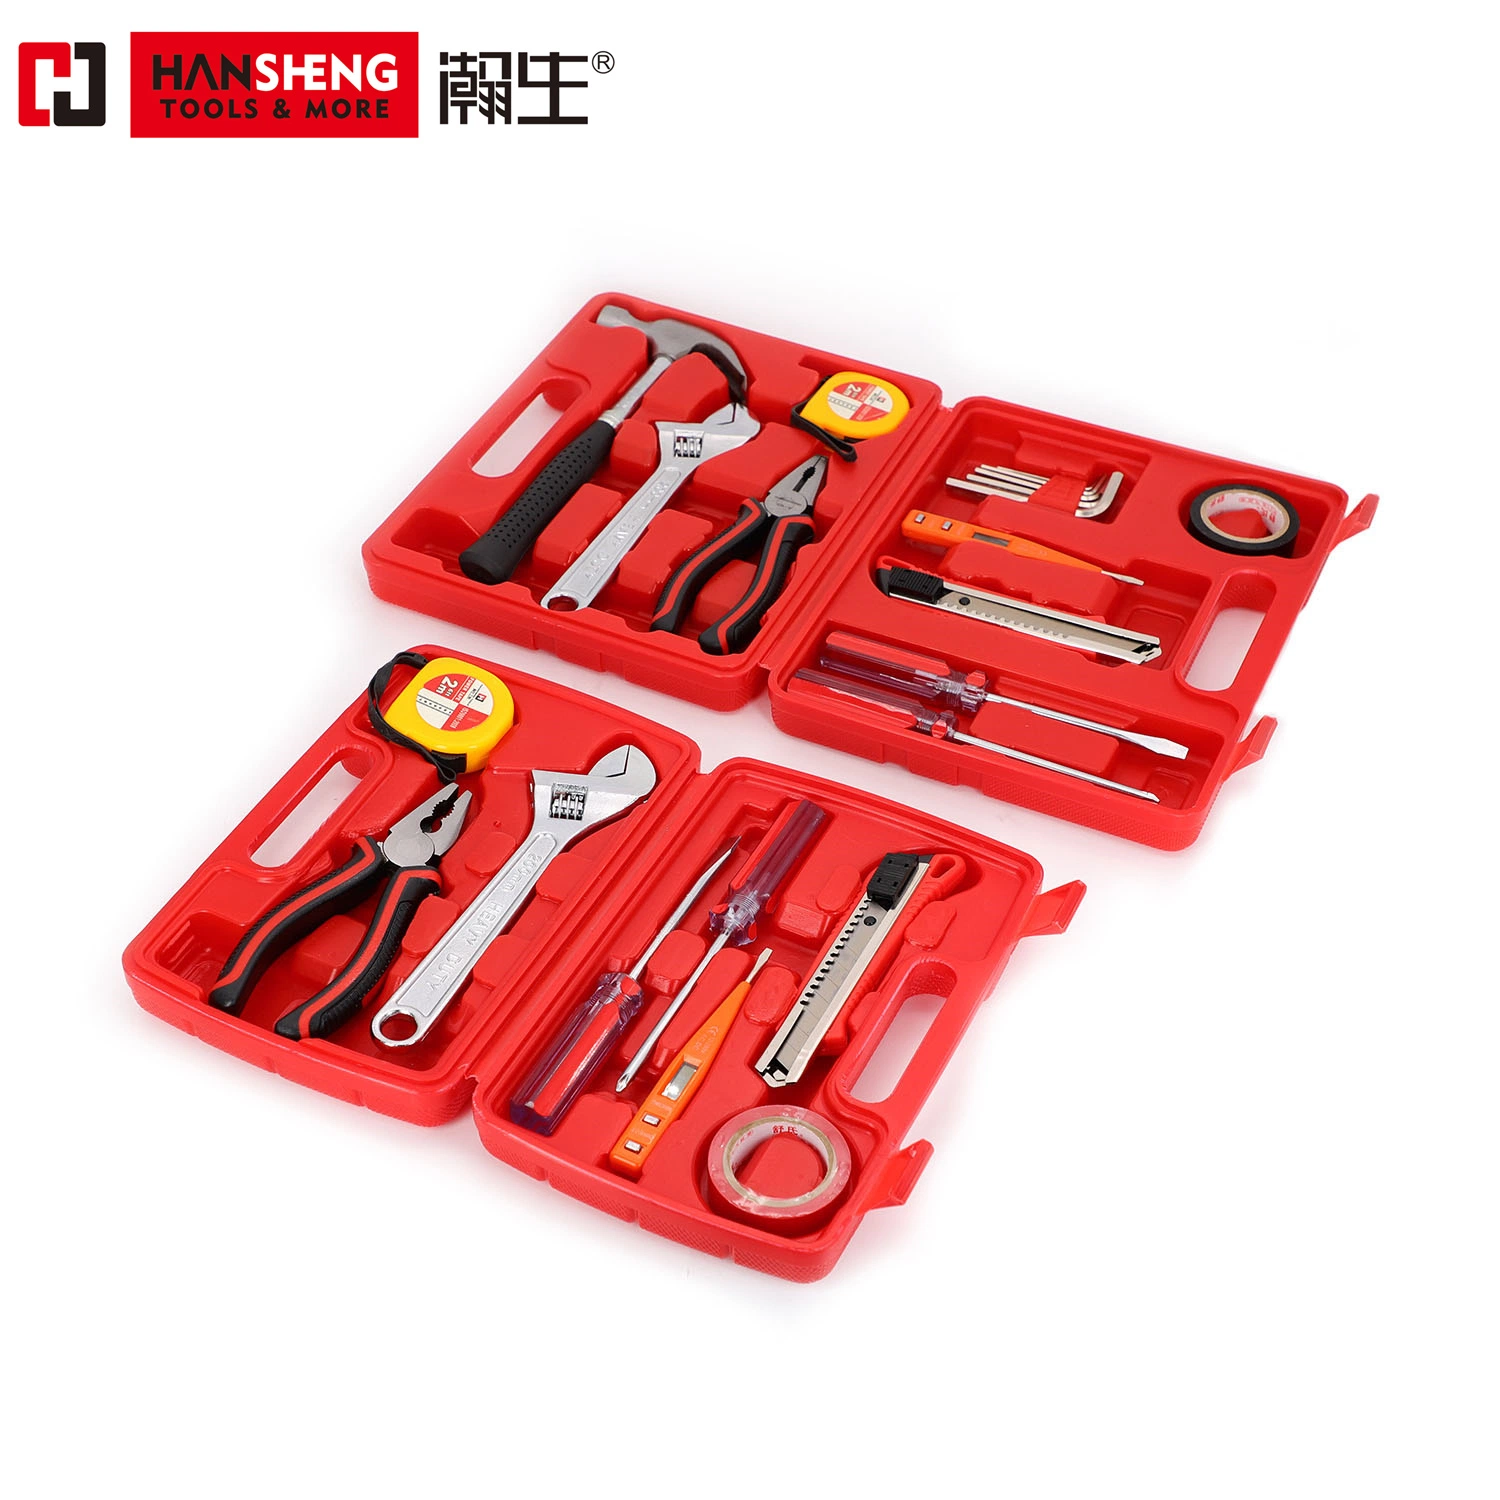 Professional Household Set Tools, Hand Tools, Hardware Tools, Plastic Toolbox, Combination, Set, Gift Tools, Pliers, Wire Clamp, Hammer, Wrench, Snips, 8 Set